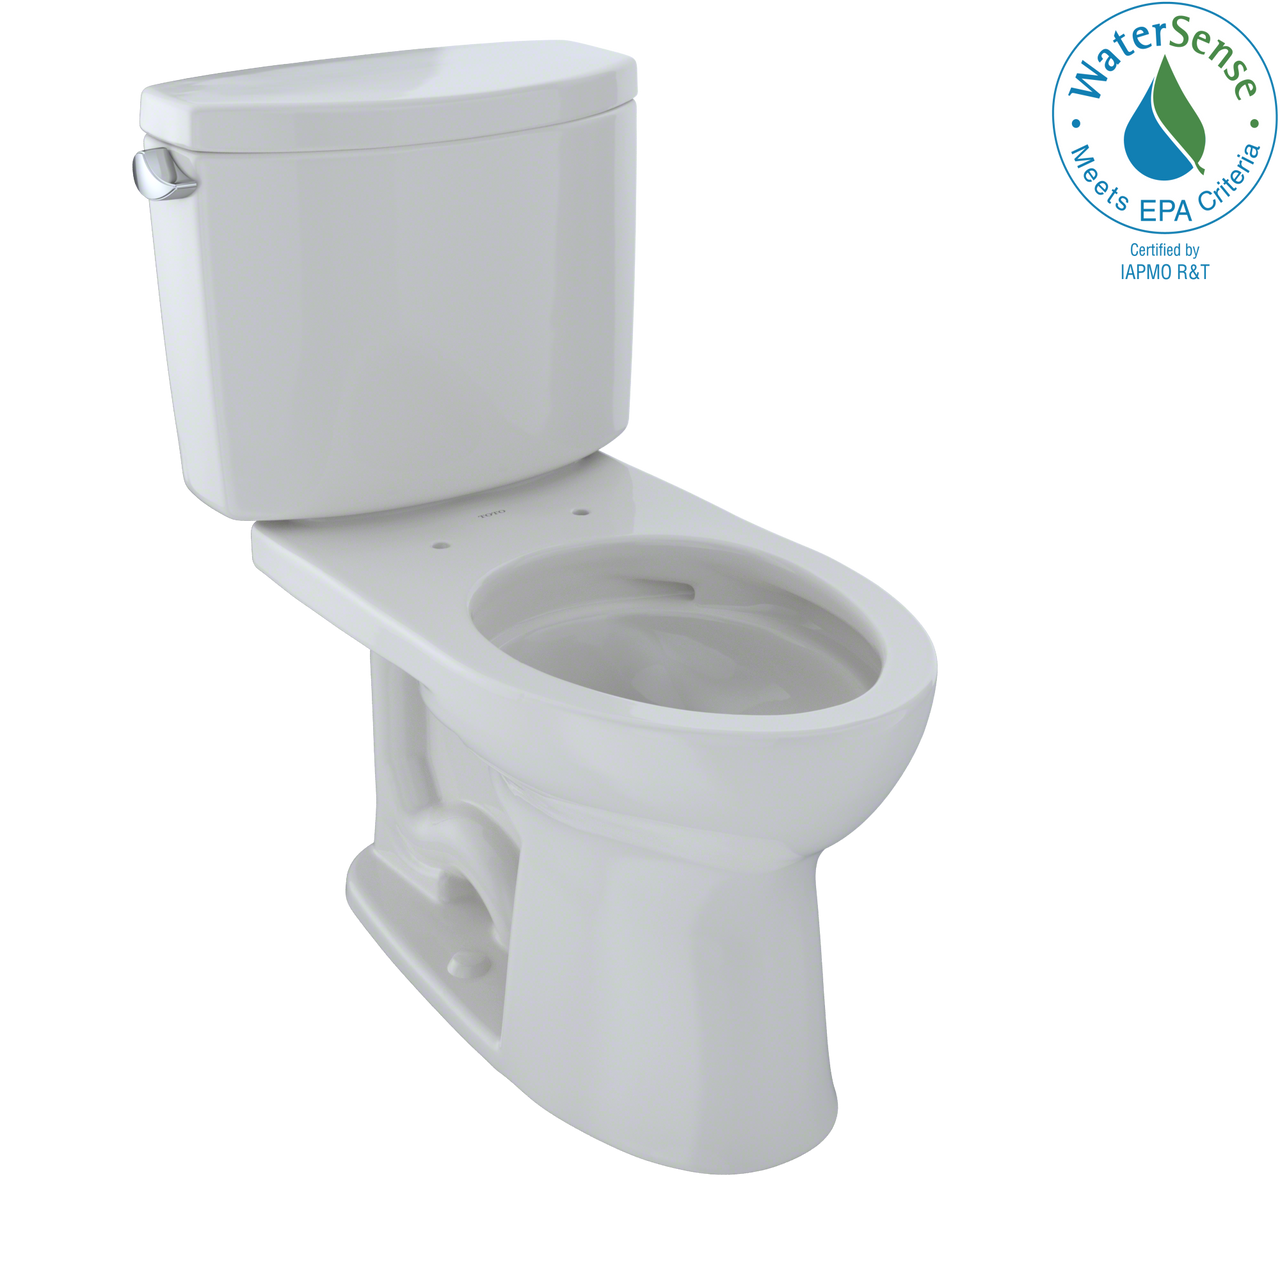 TOTO Drake II Two-Piece Elongated 1.28 GPF Universal Height Toilet with CeFiONtect,   - CST454CEFG#11 - BNGBath